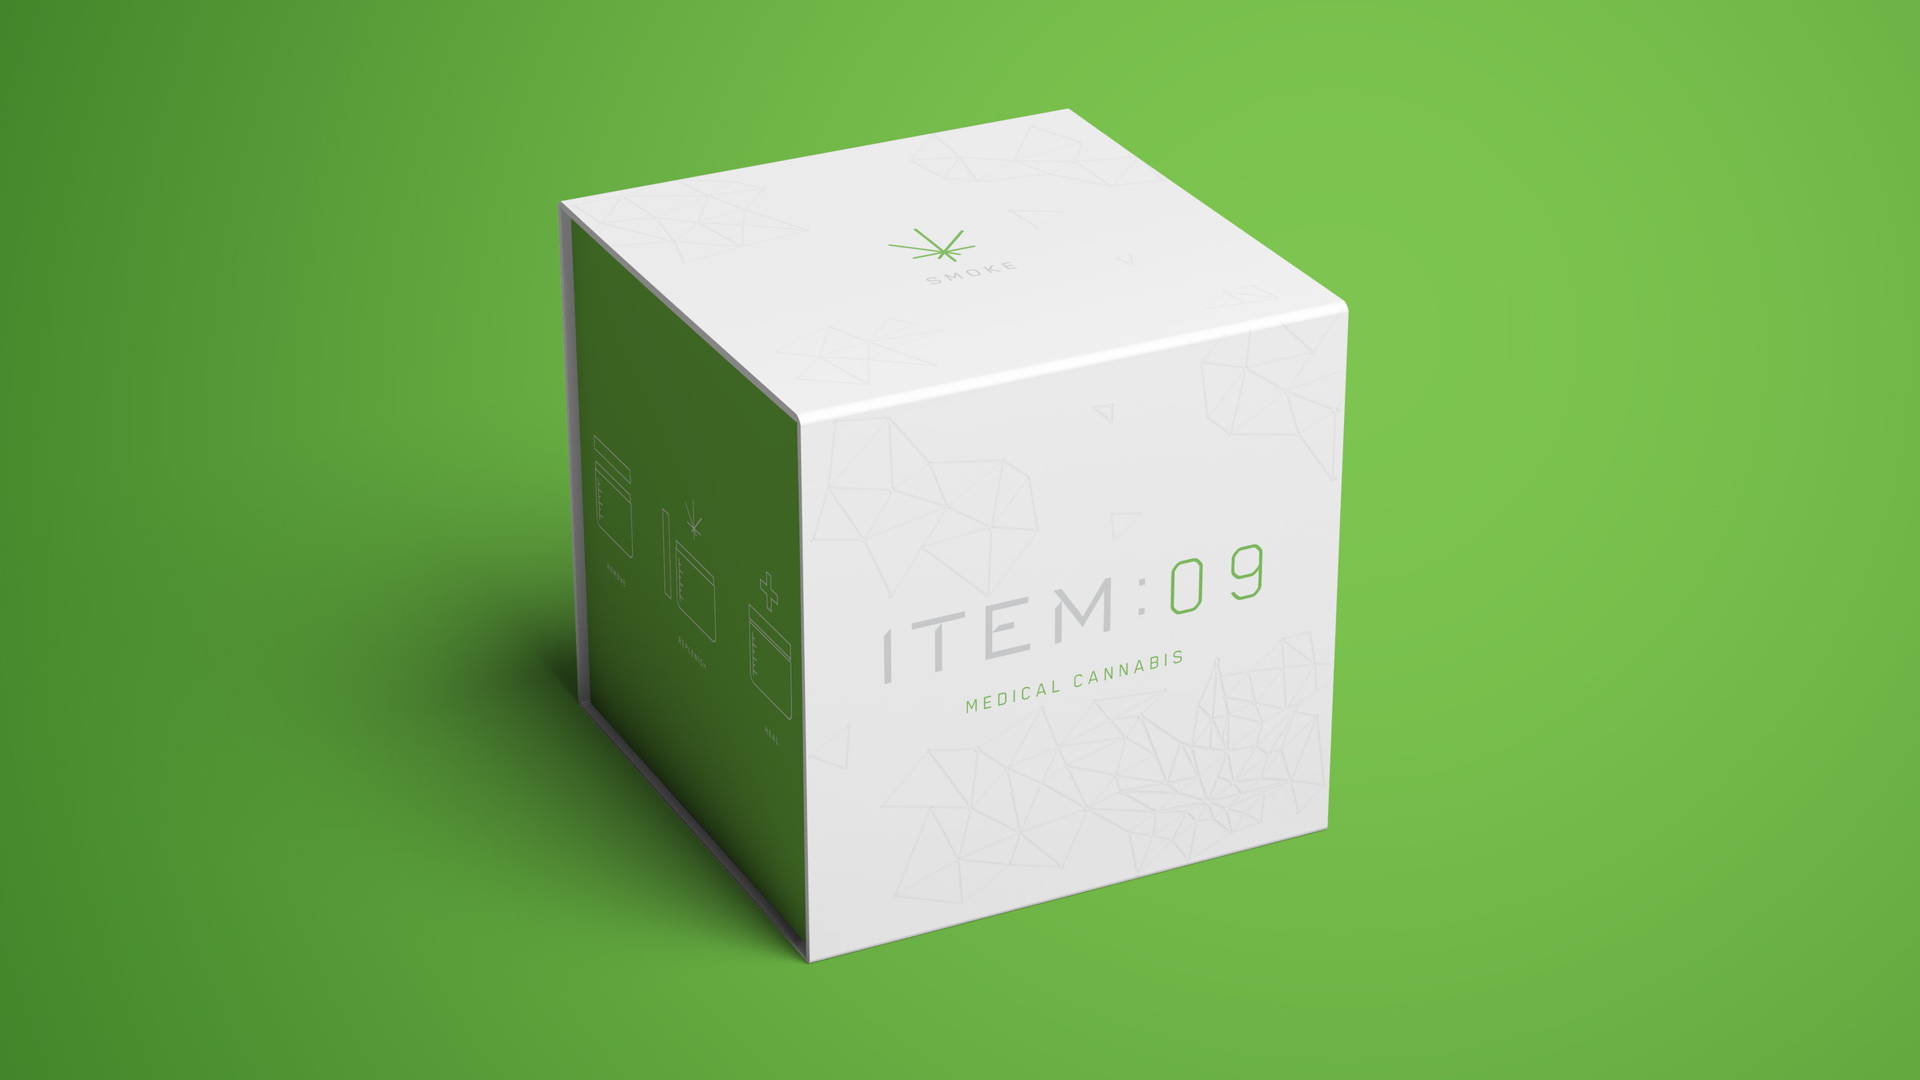 Featured image for Item:09 Is a Sophisticated Conceptual Take on Cannabis Packaging